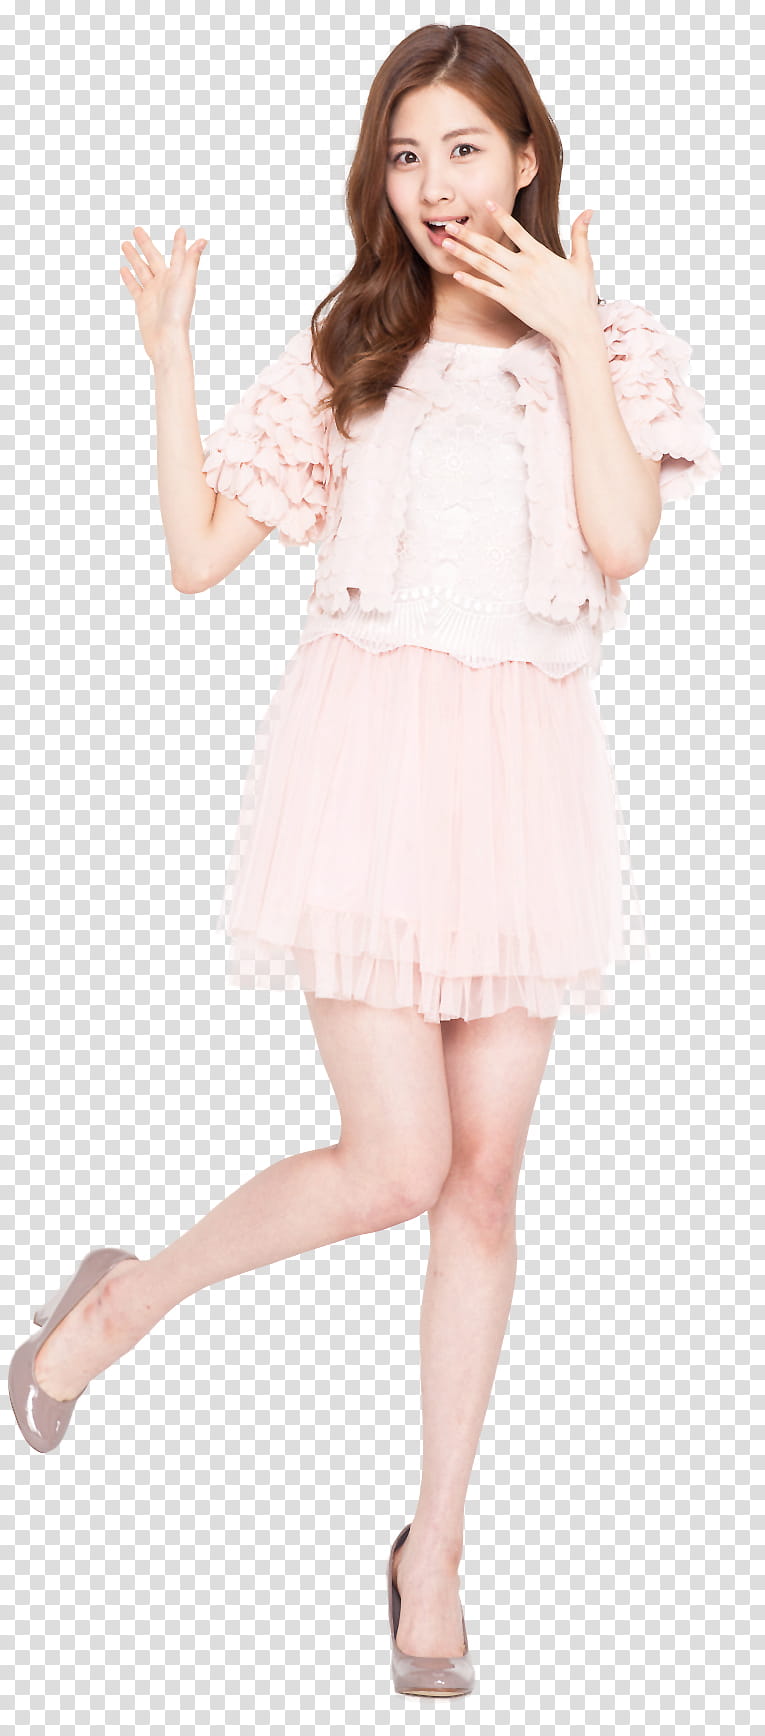 Seohyun SNSD render, standing woman with shocking facial expression transparent background PNG clipart